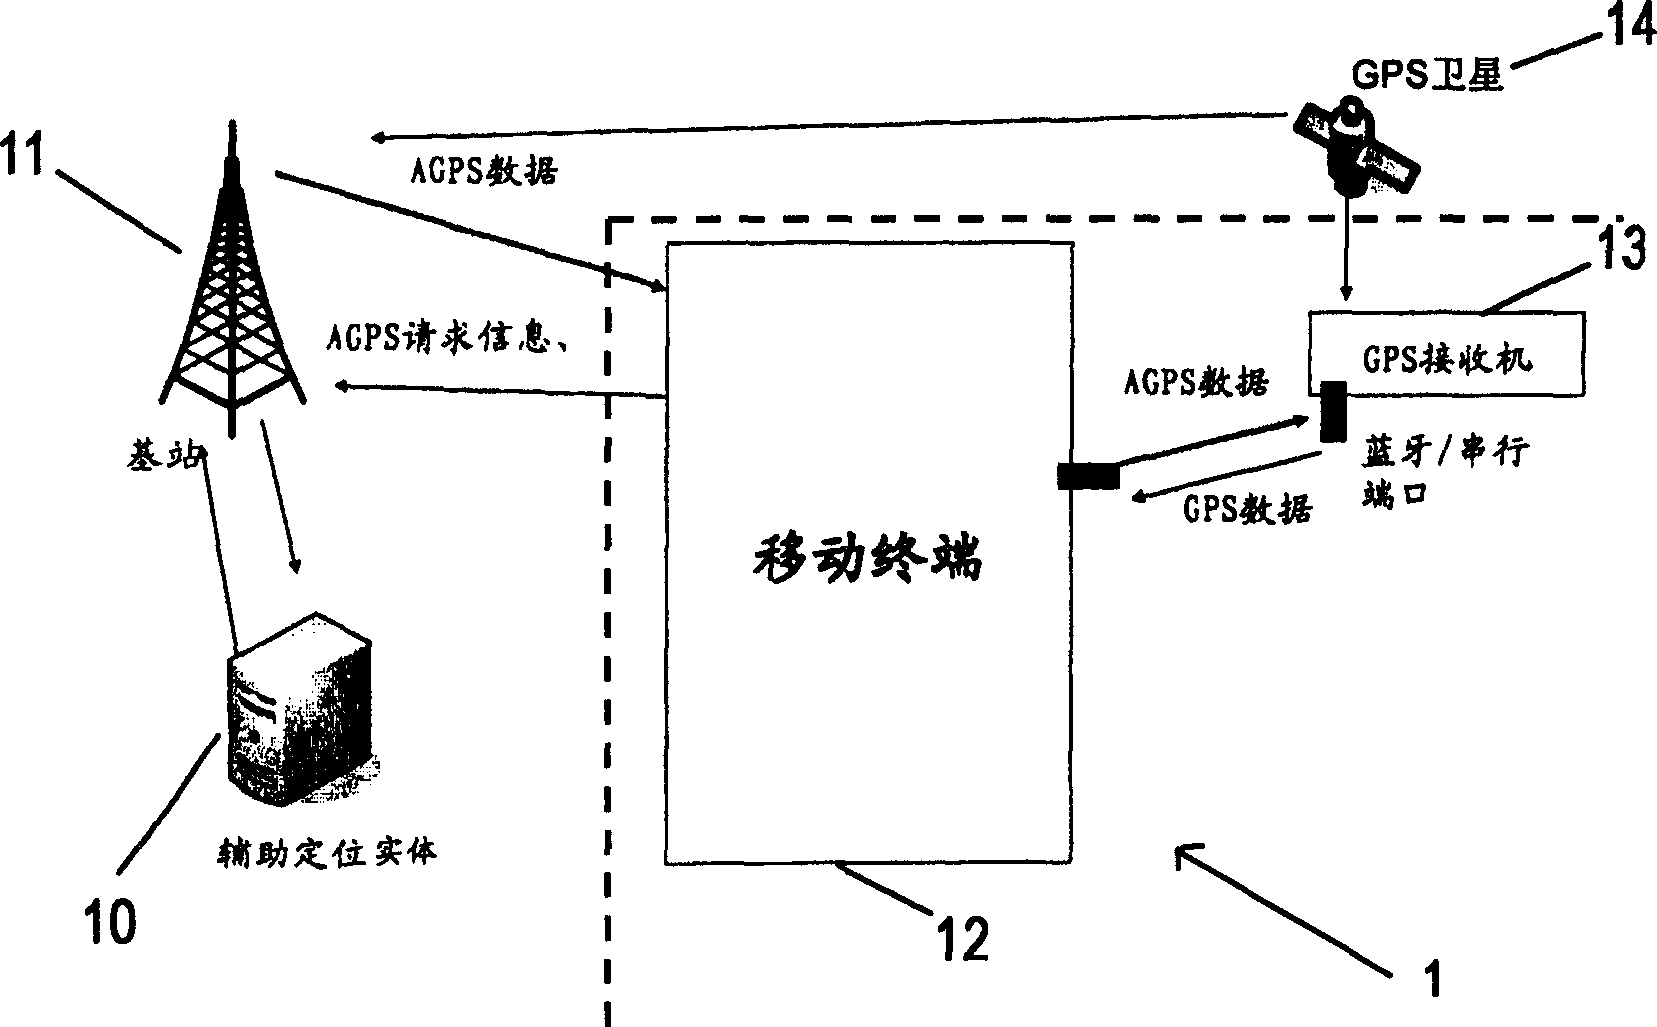 Mobile equipment having AGPS positioning function and auxiliary global positioning method